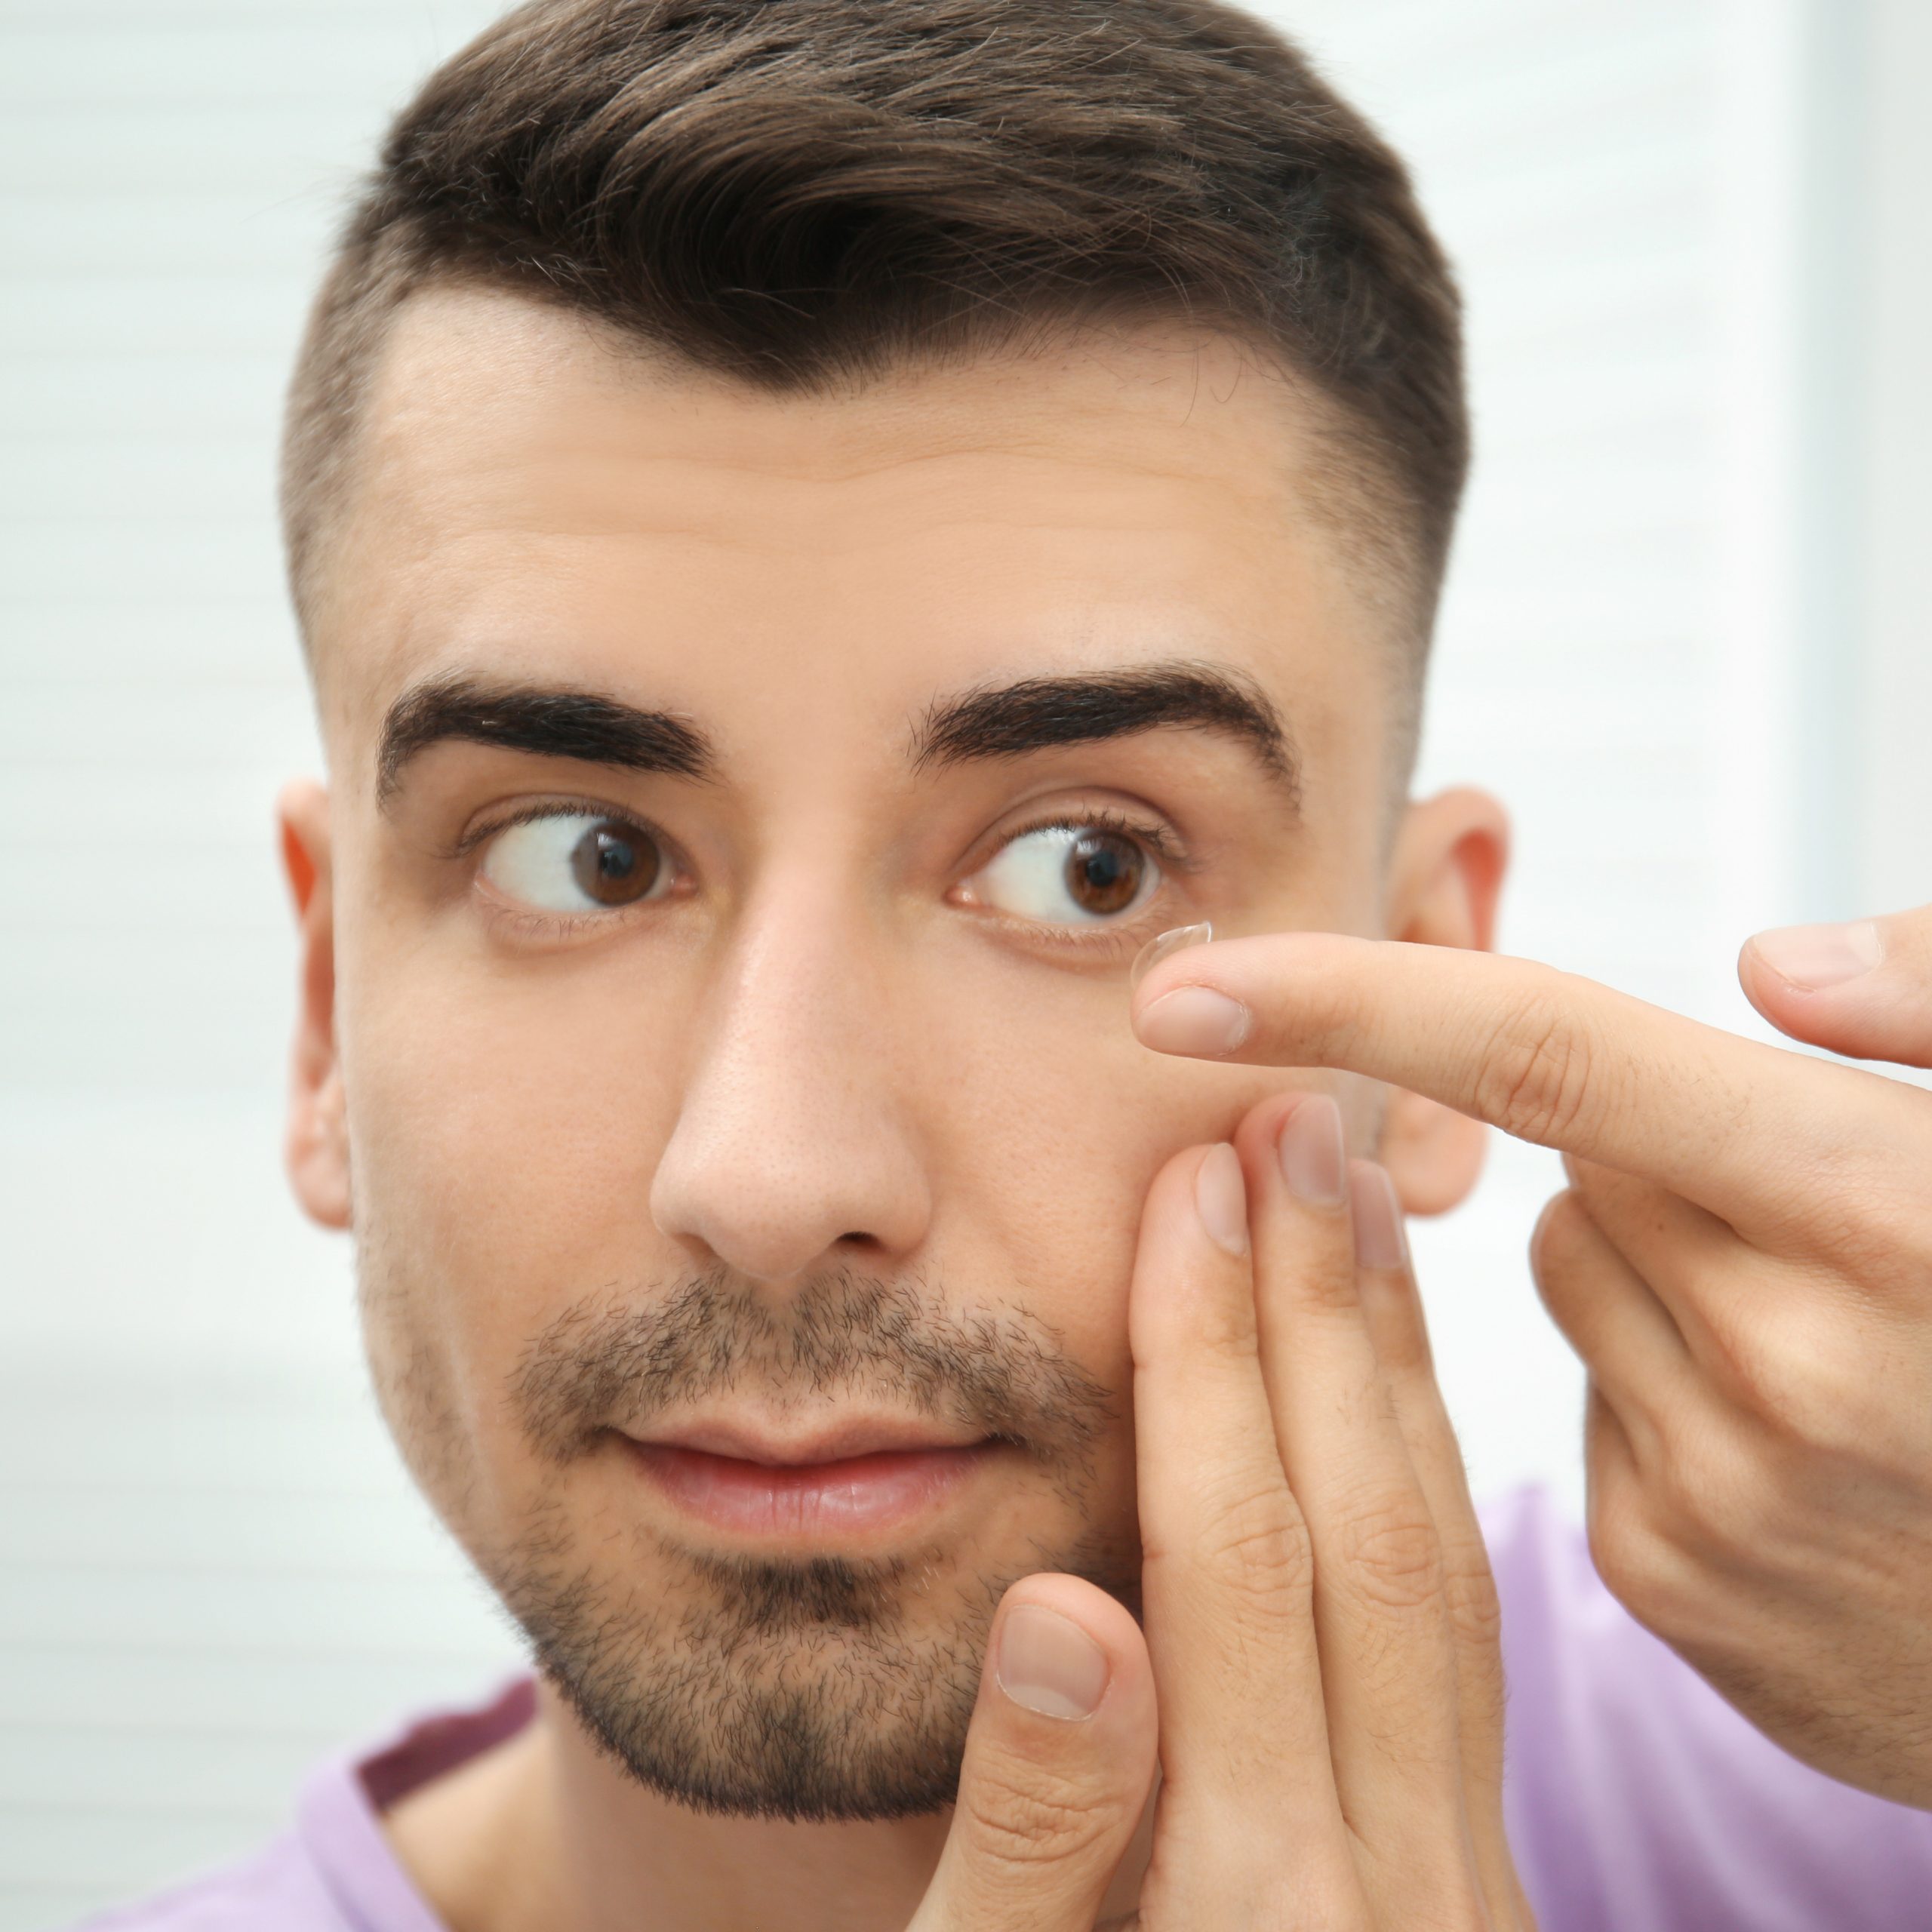 young man holding contact lens near eyey